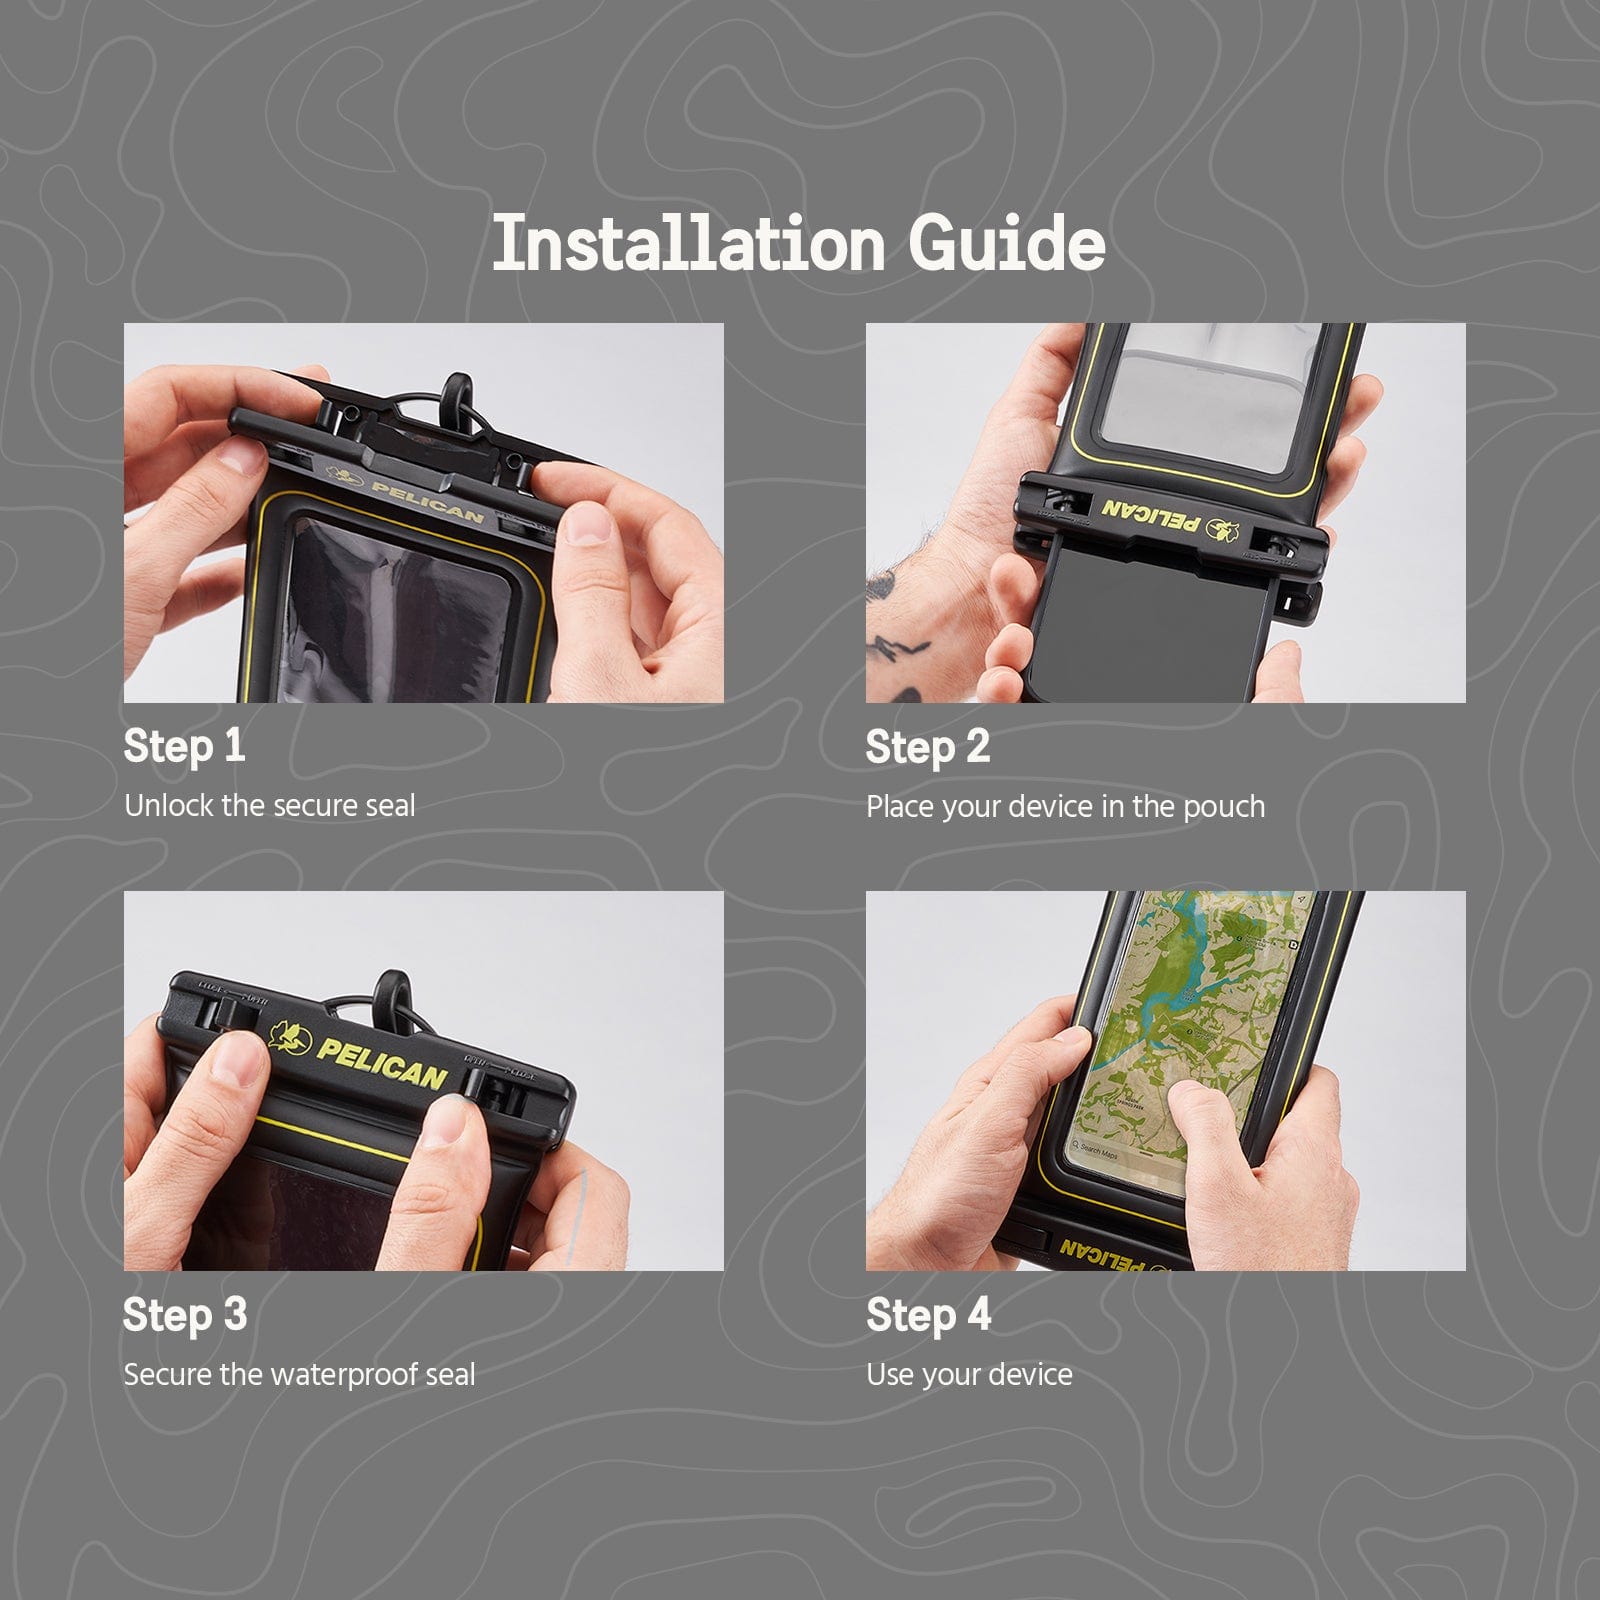 Installation Guide. Step 1: Unlock the secure seal. Step 2: Place your device in the pouch. Step 3: Secure the waterproof seal. Step 4: Use your device.